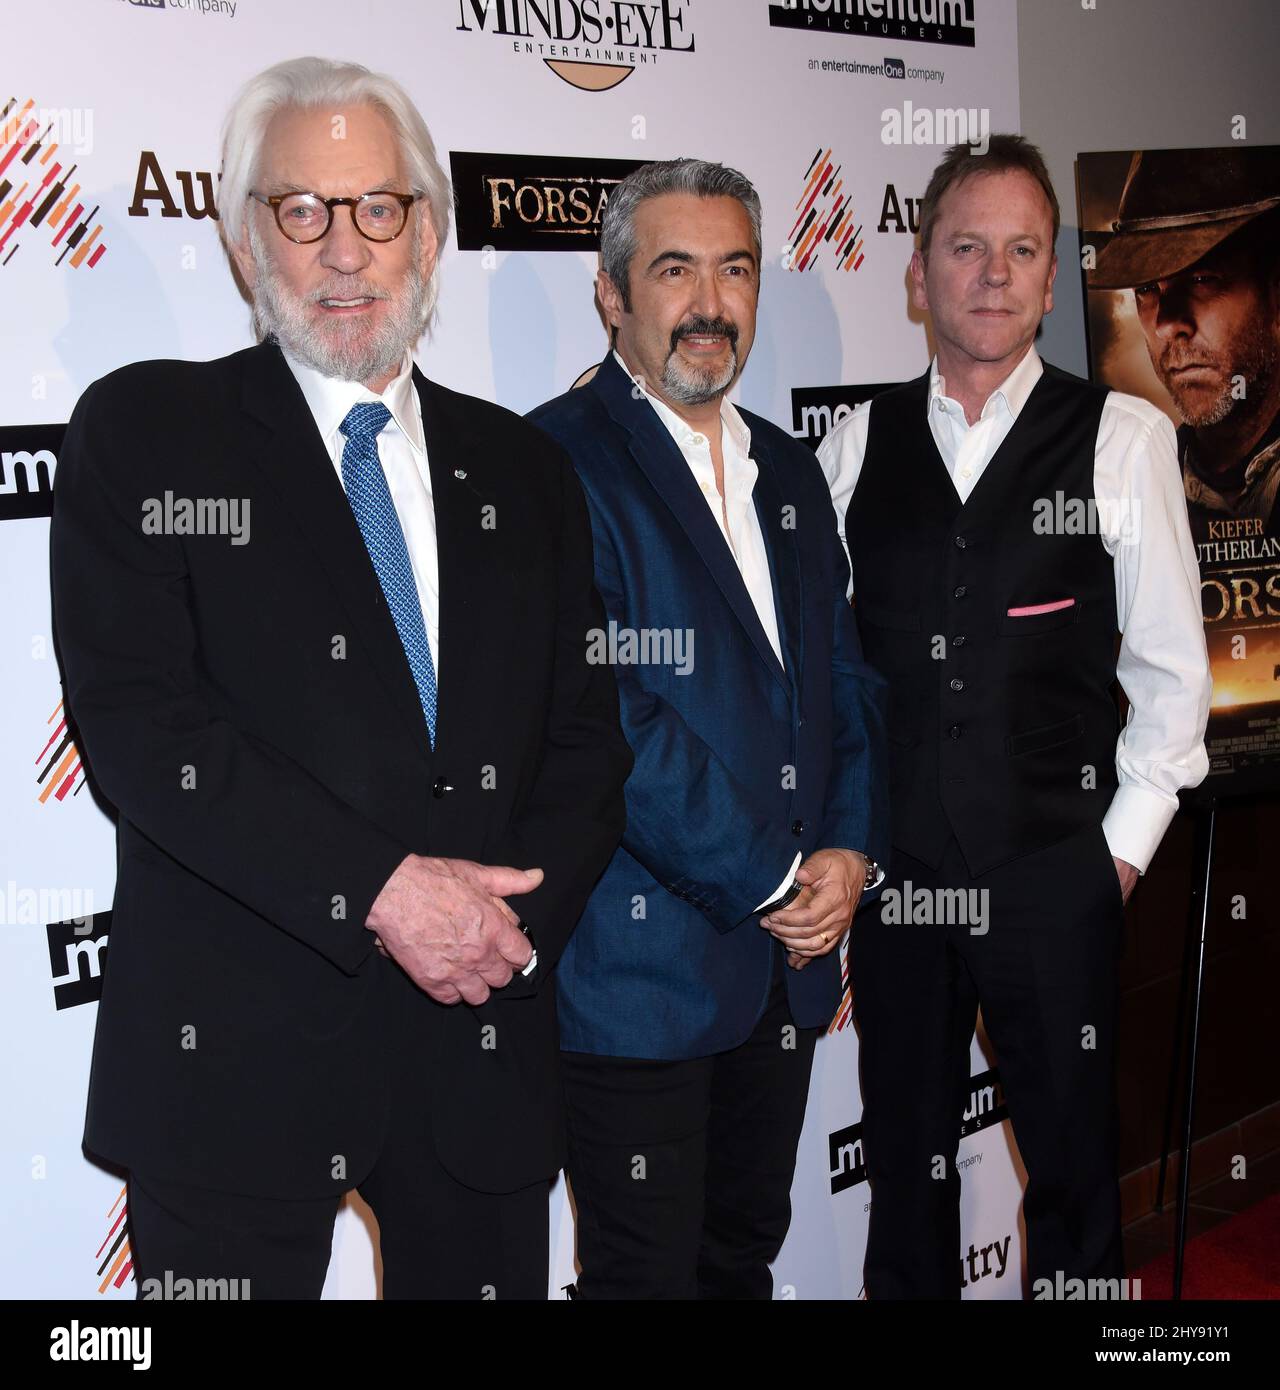 Donald Sutherland, Jon Cassar and Kiefer Sutherland attending the 'Forsaken' Los Angeles Special Screening held at the Autry Museum Of The American West, February 16, 2016 Los Angeles, Ca. Stock Photo